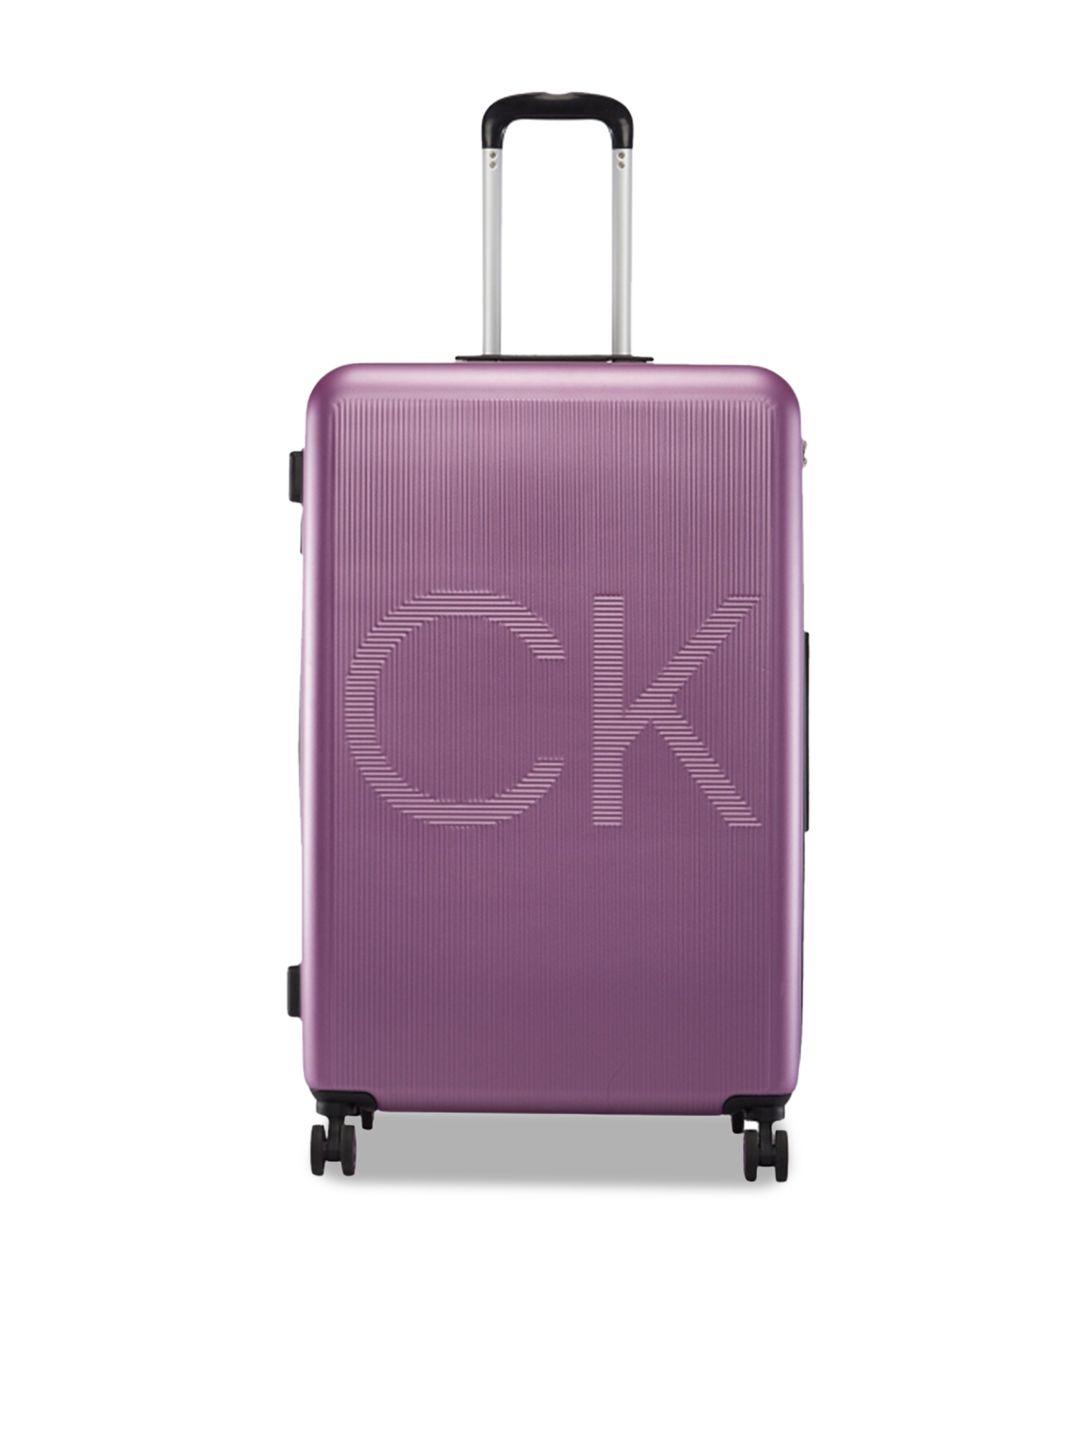 calvin klein vision textured hard-sided large trolley suitcase